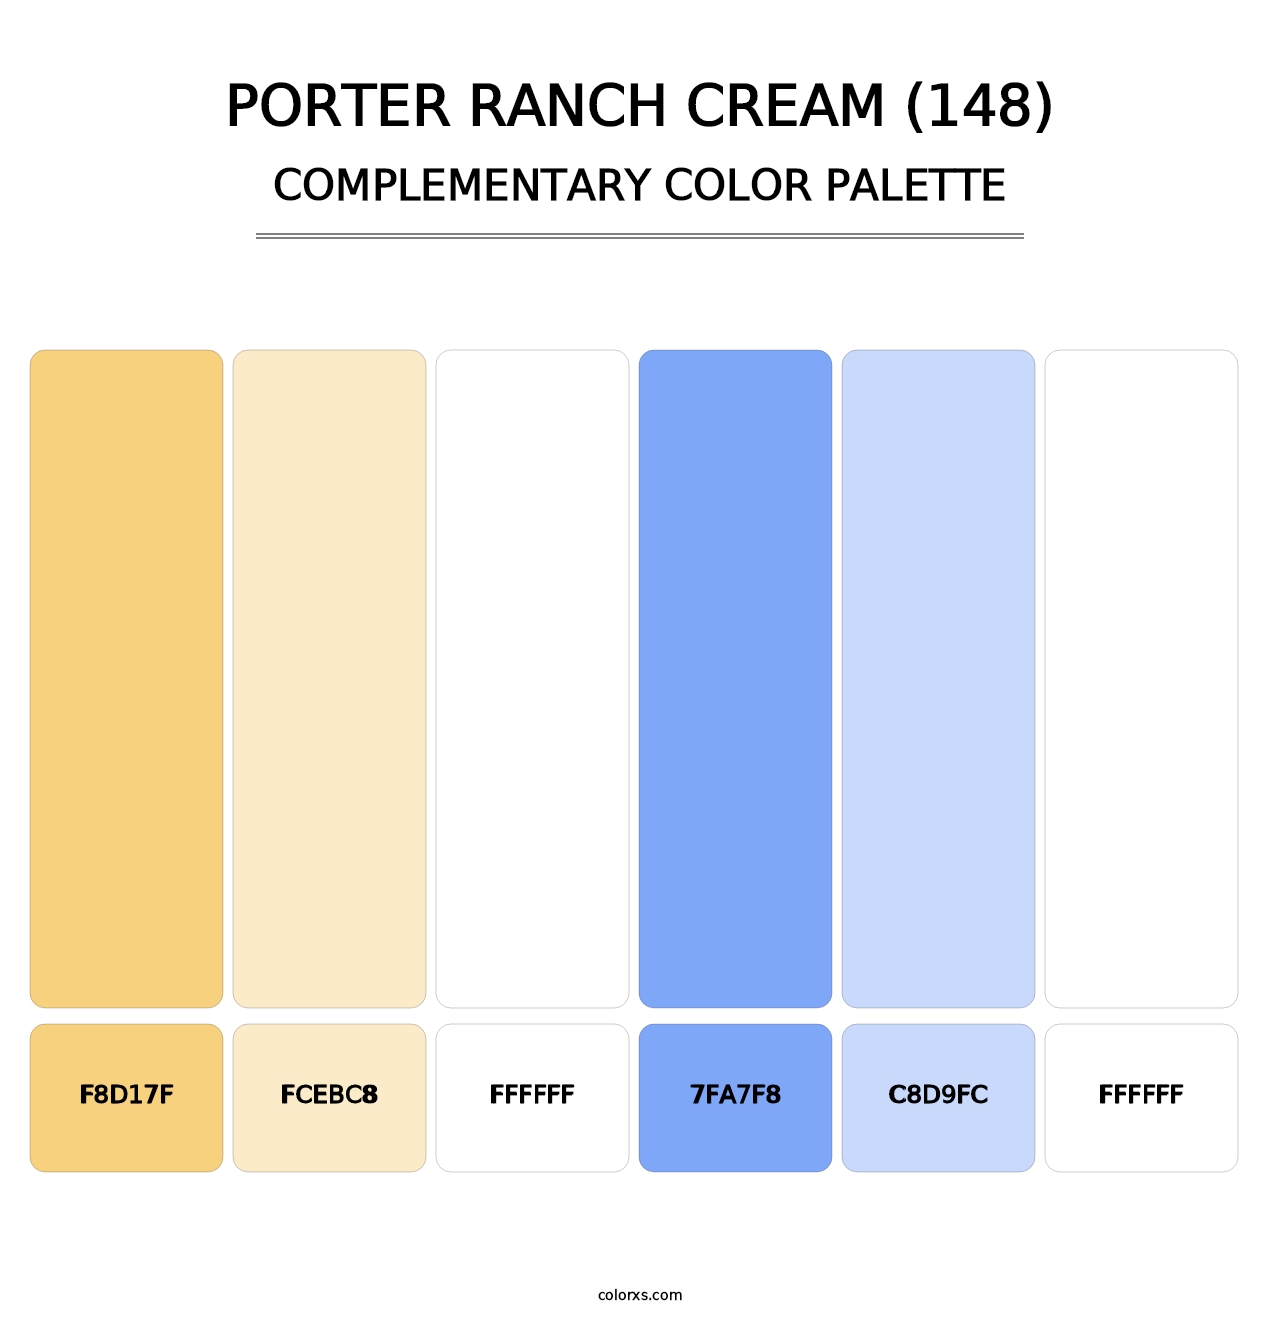 Porter Ranch Cream (148) - Complementary Color Palette